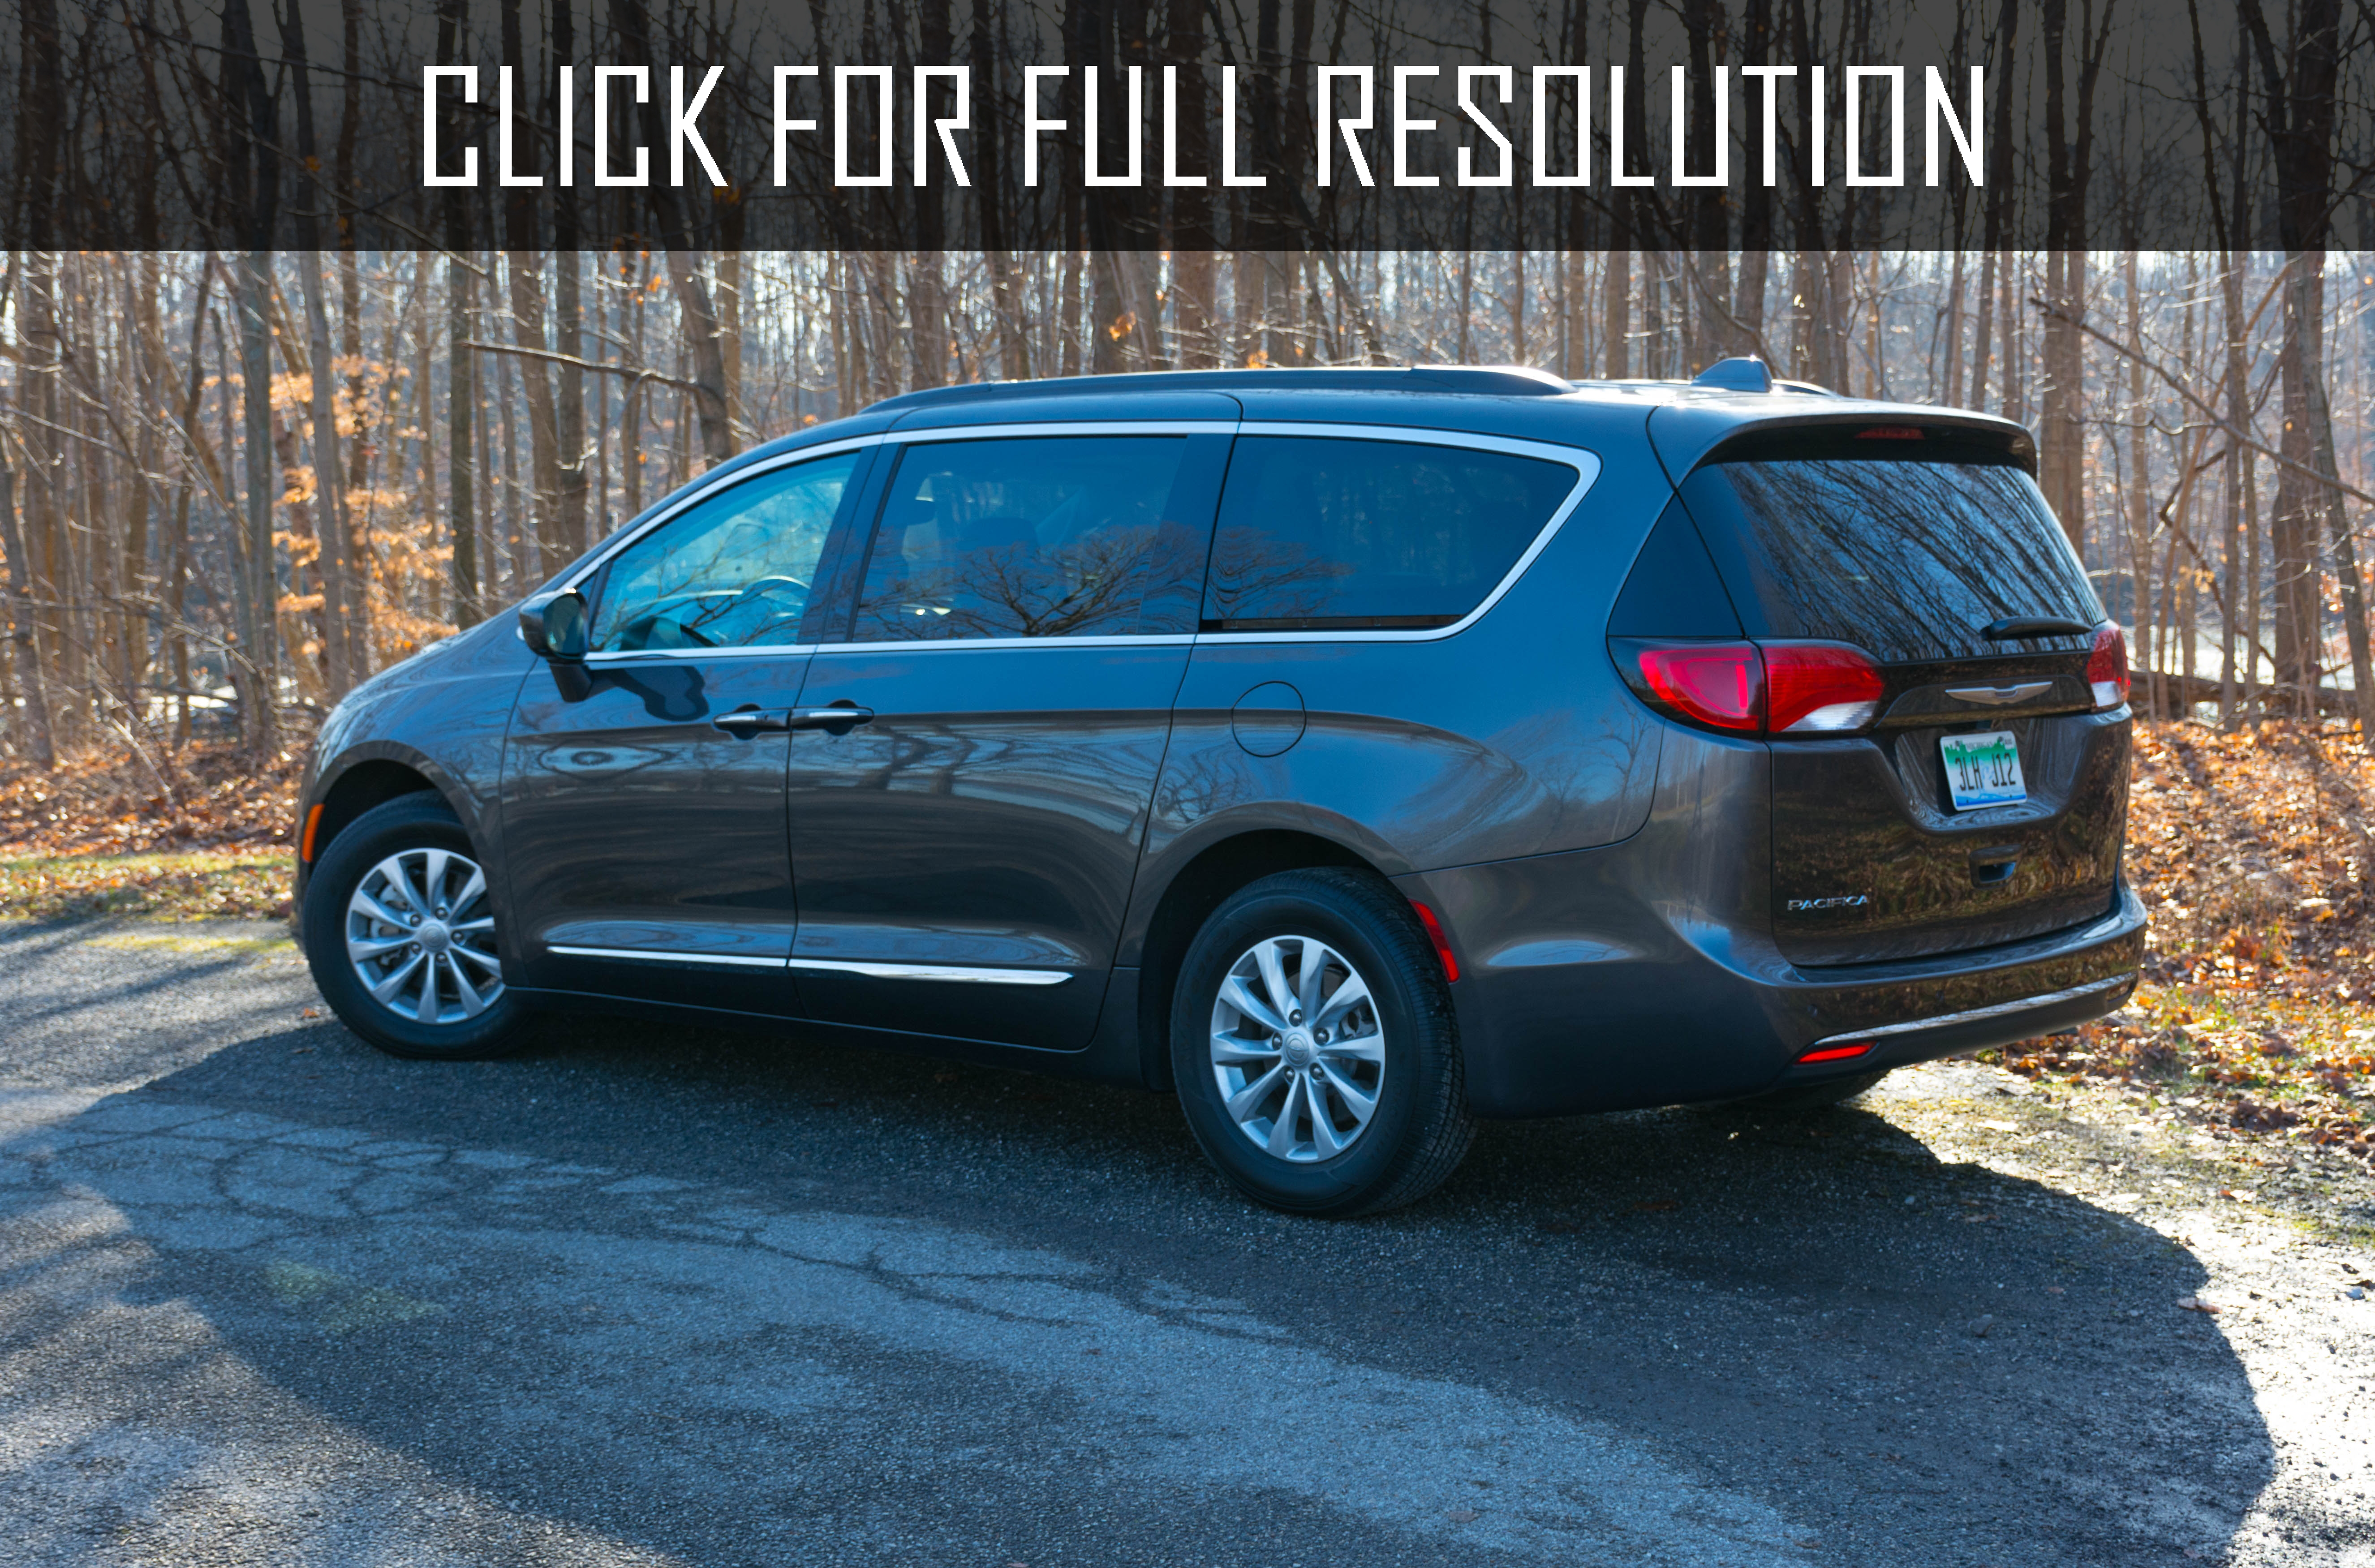 2014 Chrysler Pacifica Touring news, reviews, msrp, ratings with